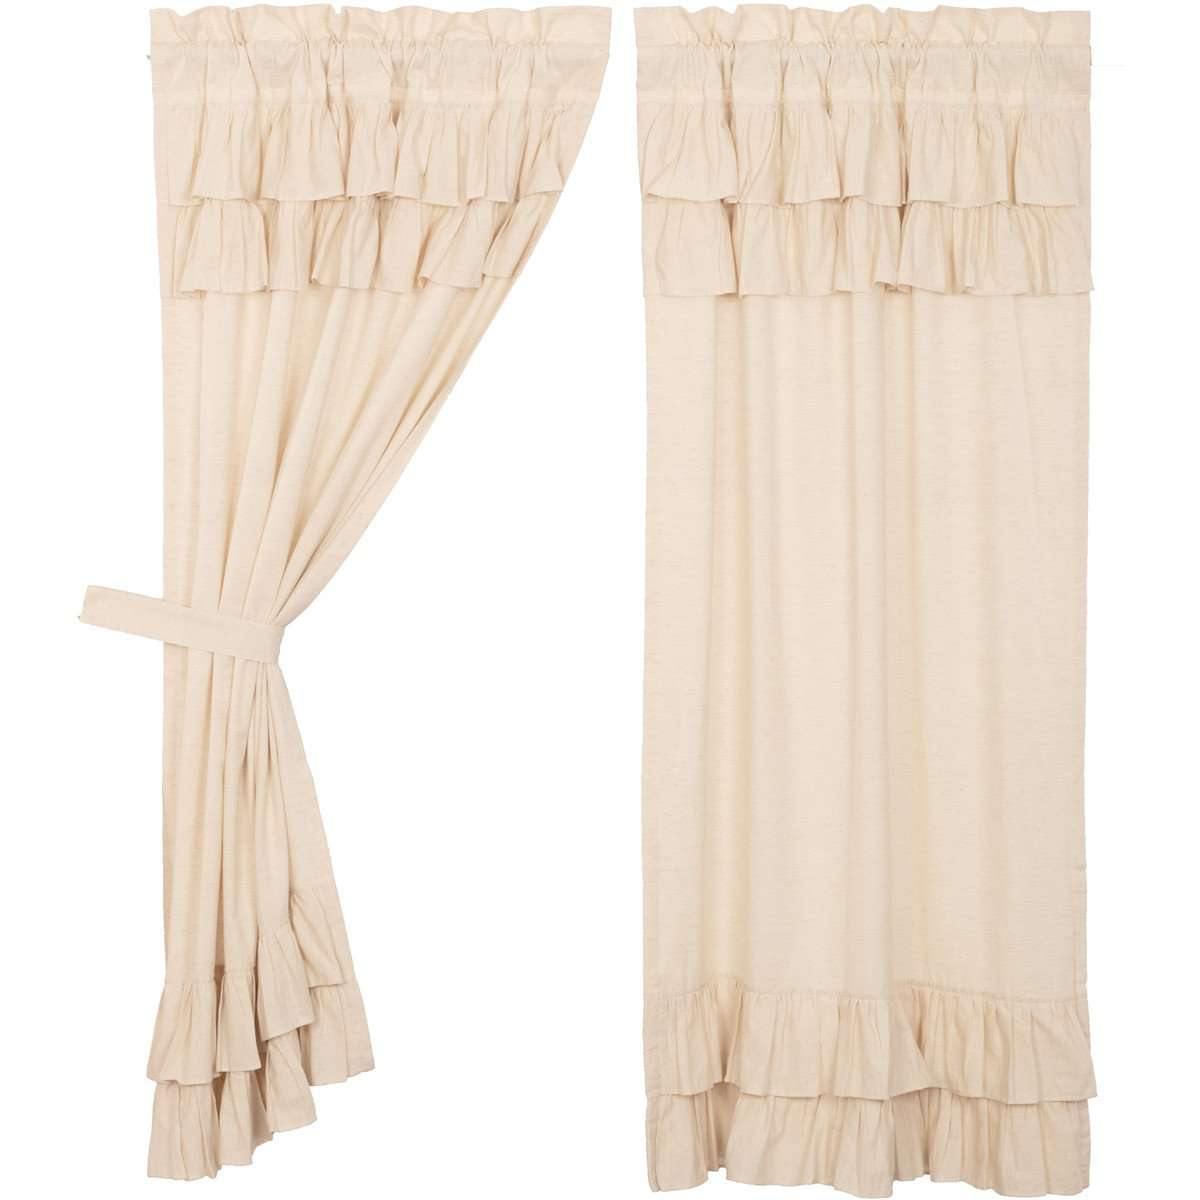 Simple Life Flax Natural Ruffled Short Panel Curtain Set of 2 63x36 VHC Brands - The Fox Decor